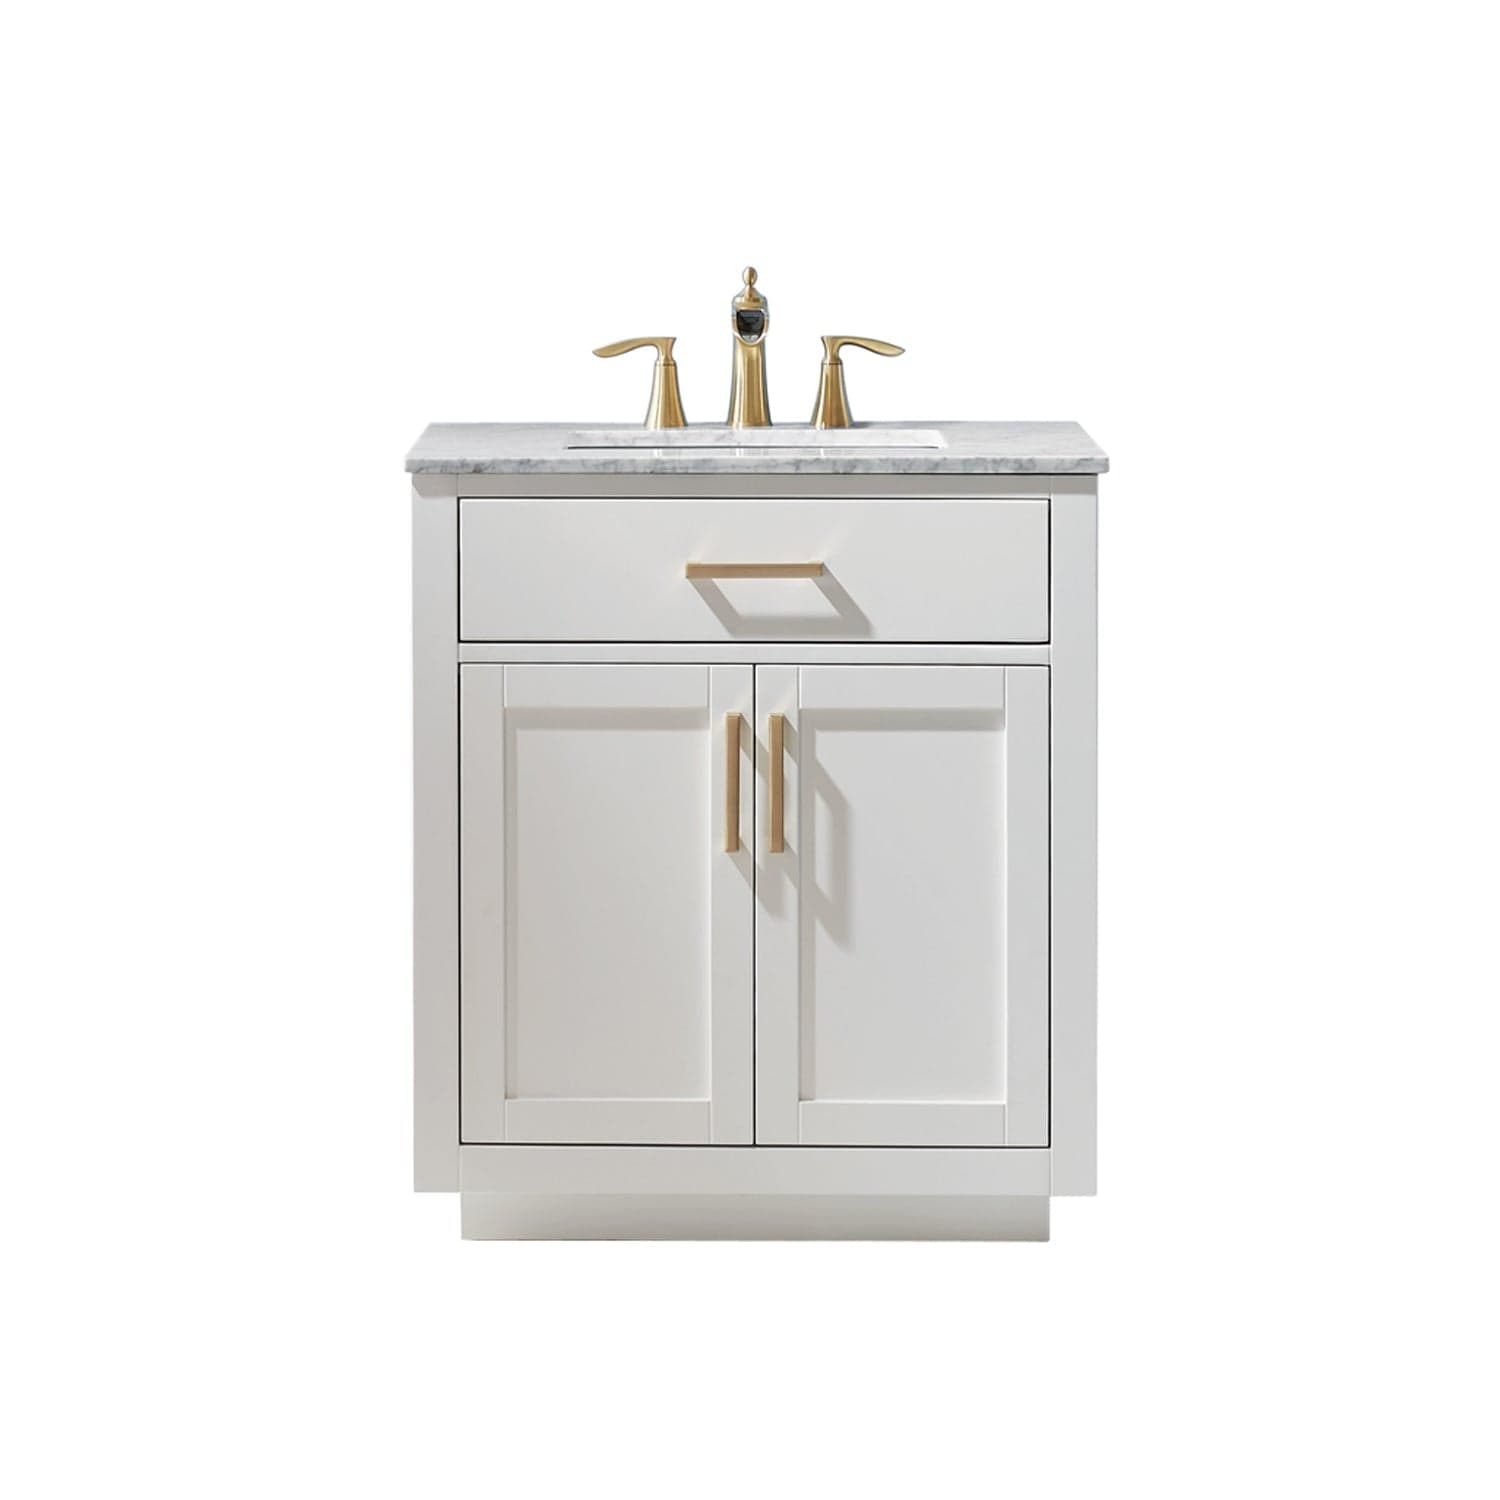 Altair Ivy 30" Single Bathroom Vanity Set in White and Carrara White Marble Countertop without Mirror 531030-WH-CA-NM - Molaix631112971089Vanity531030-WH-CA-NM